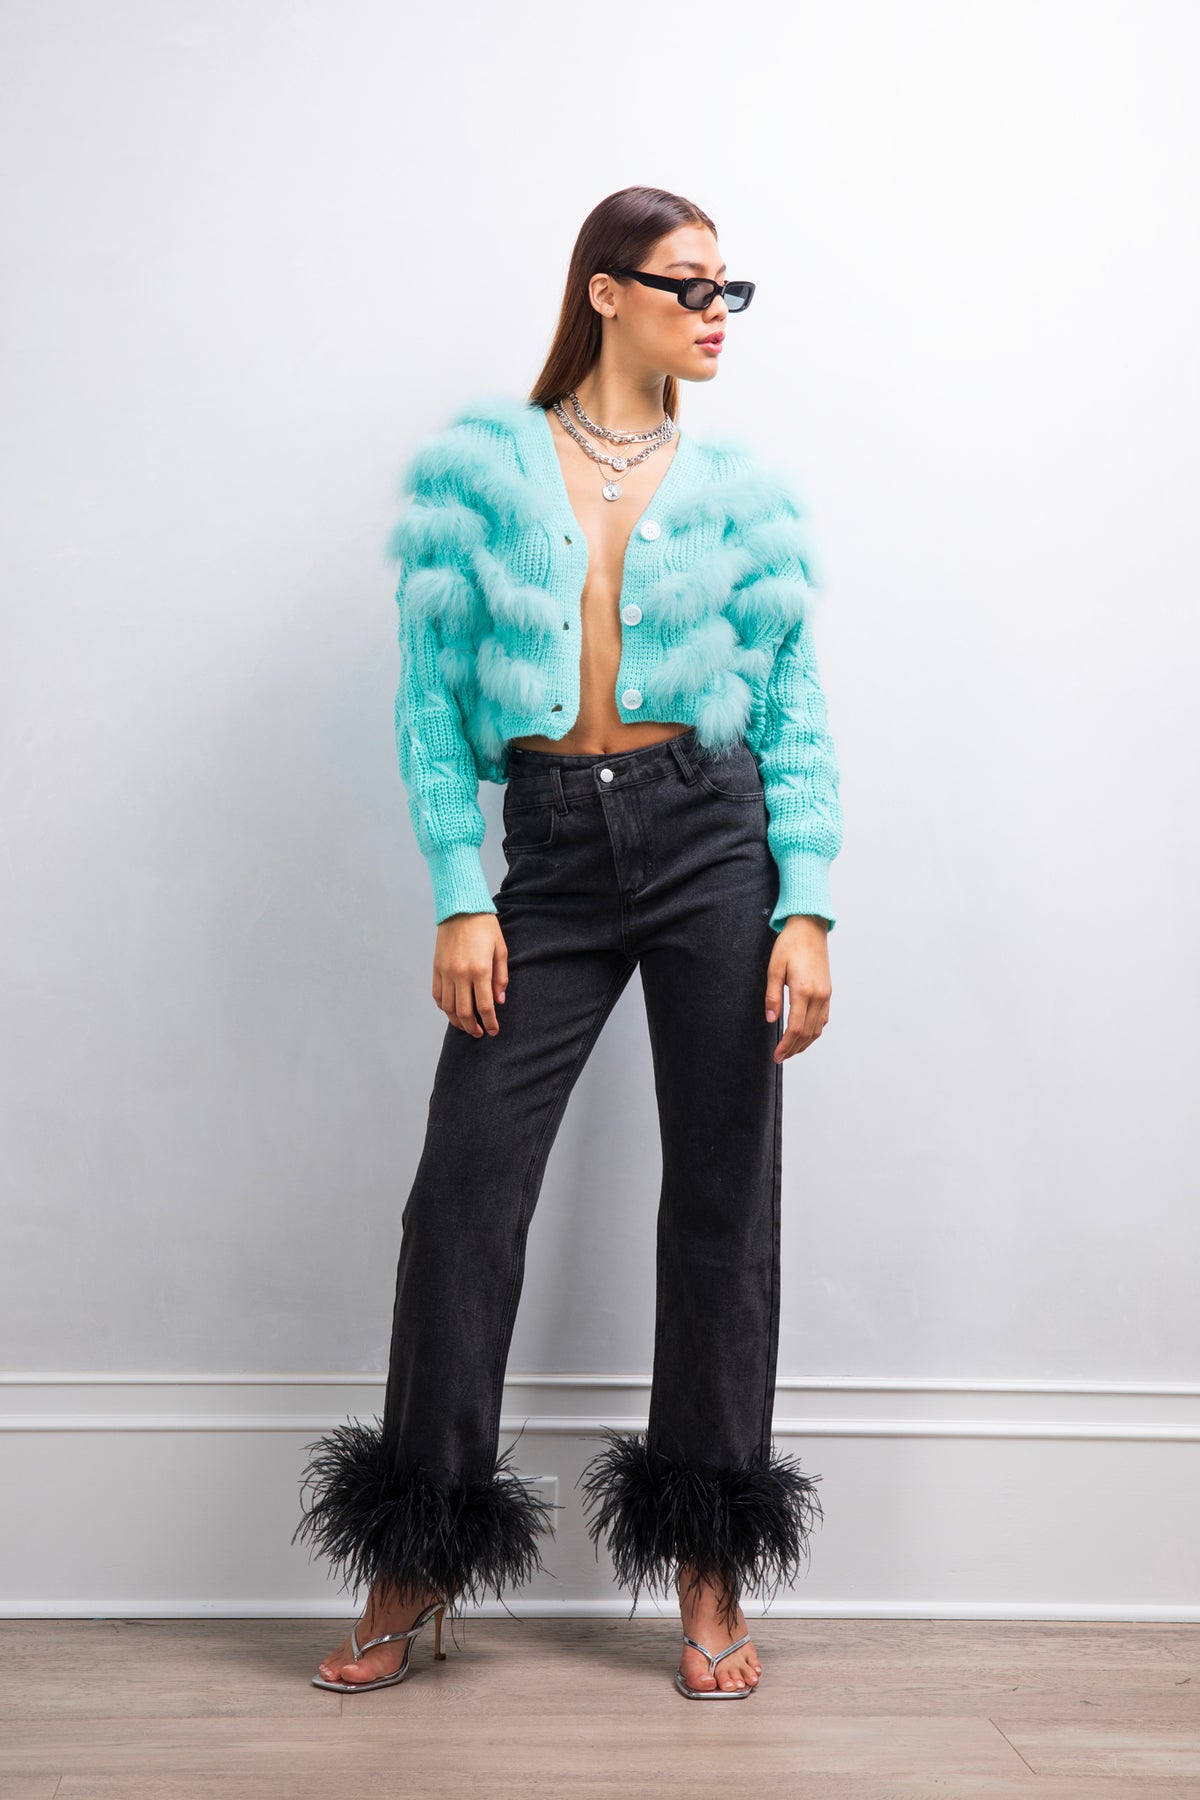 Honey Pot fur and wool cardigan in Baby Blue